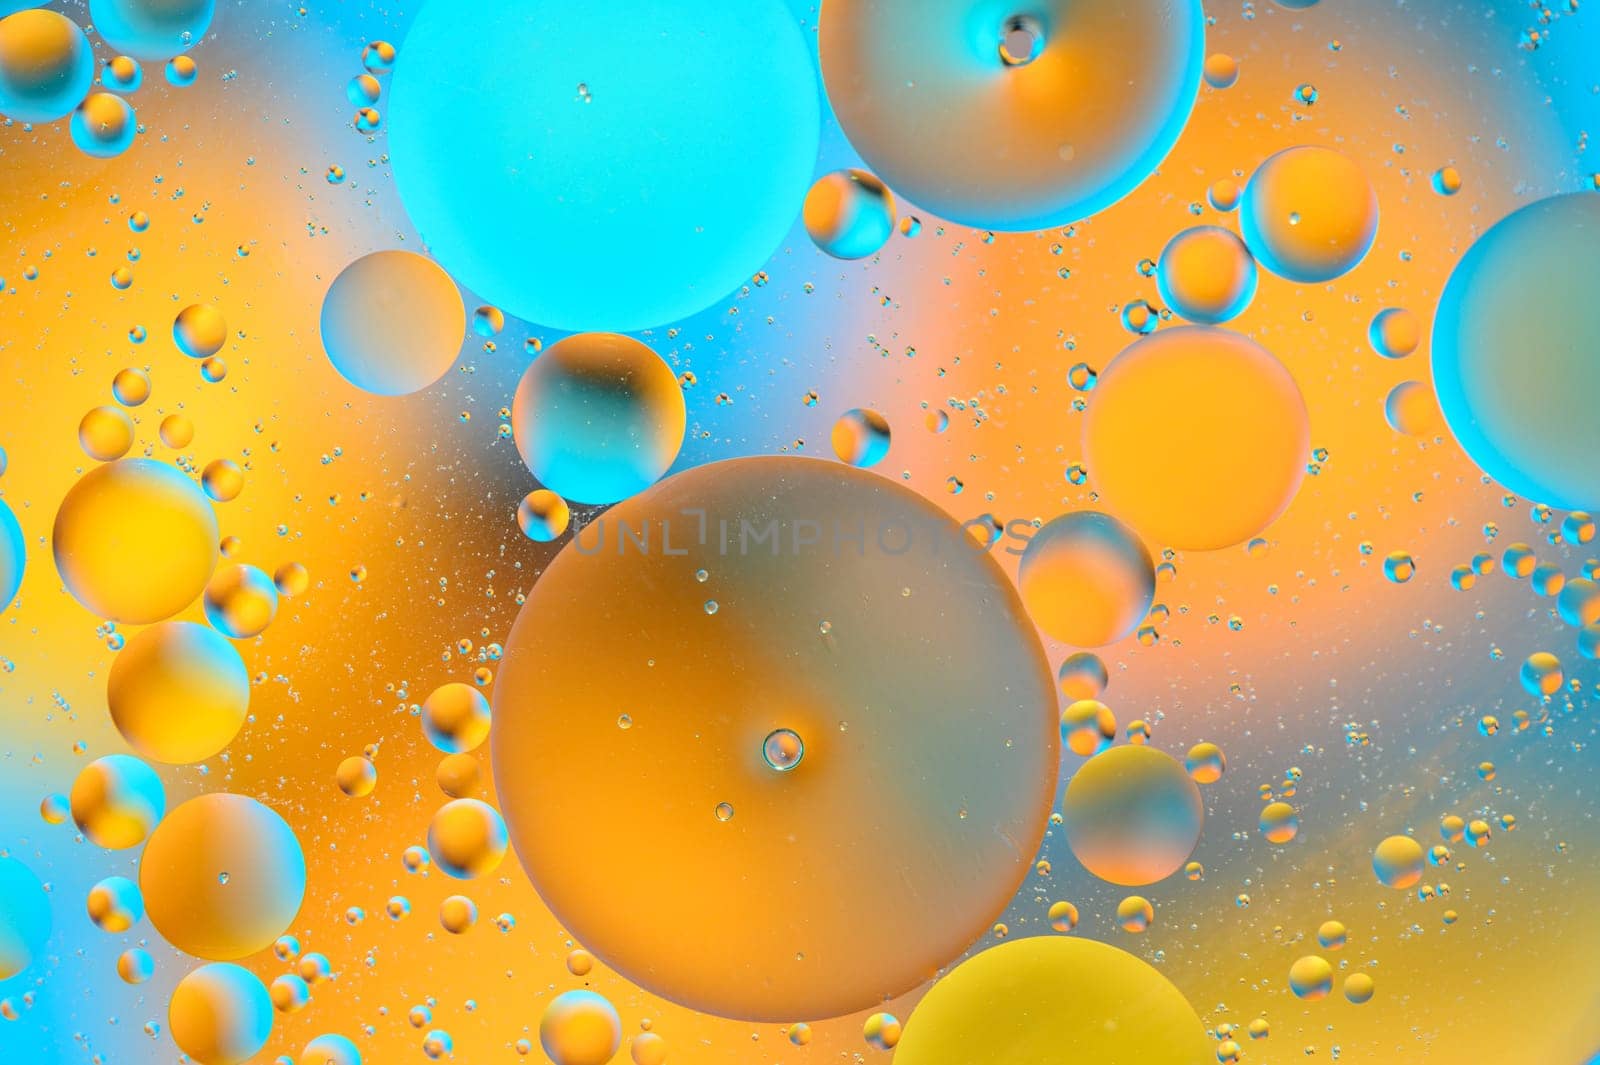 abstract background of multi-colored spots and circles microcosm universe galaxy 15 by Mixa74